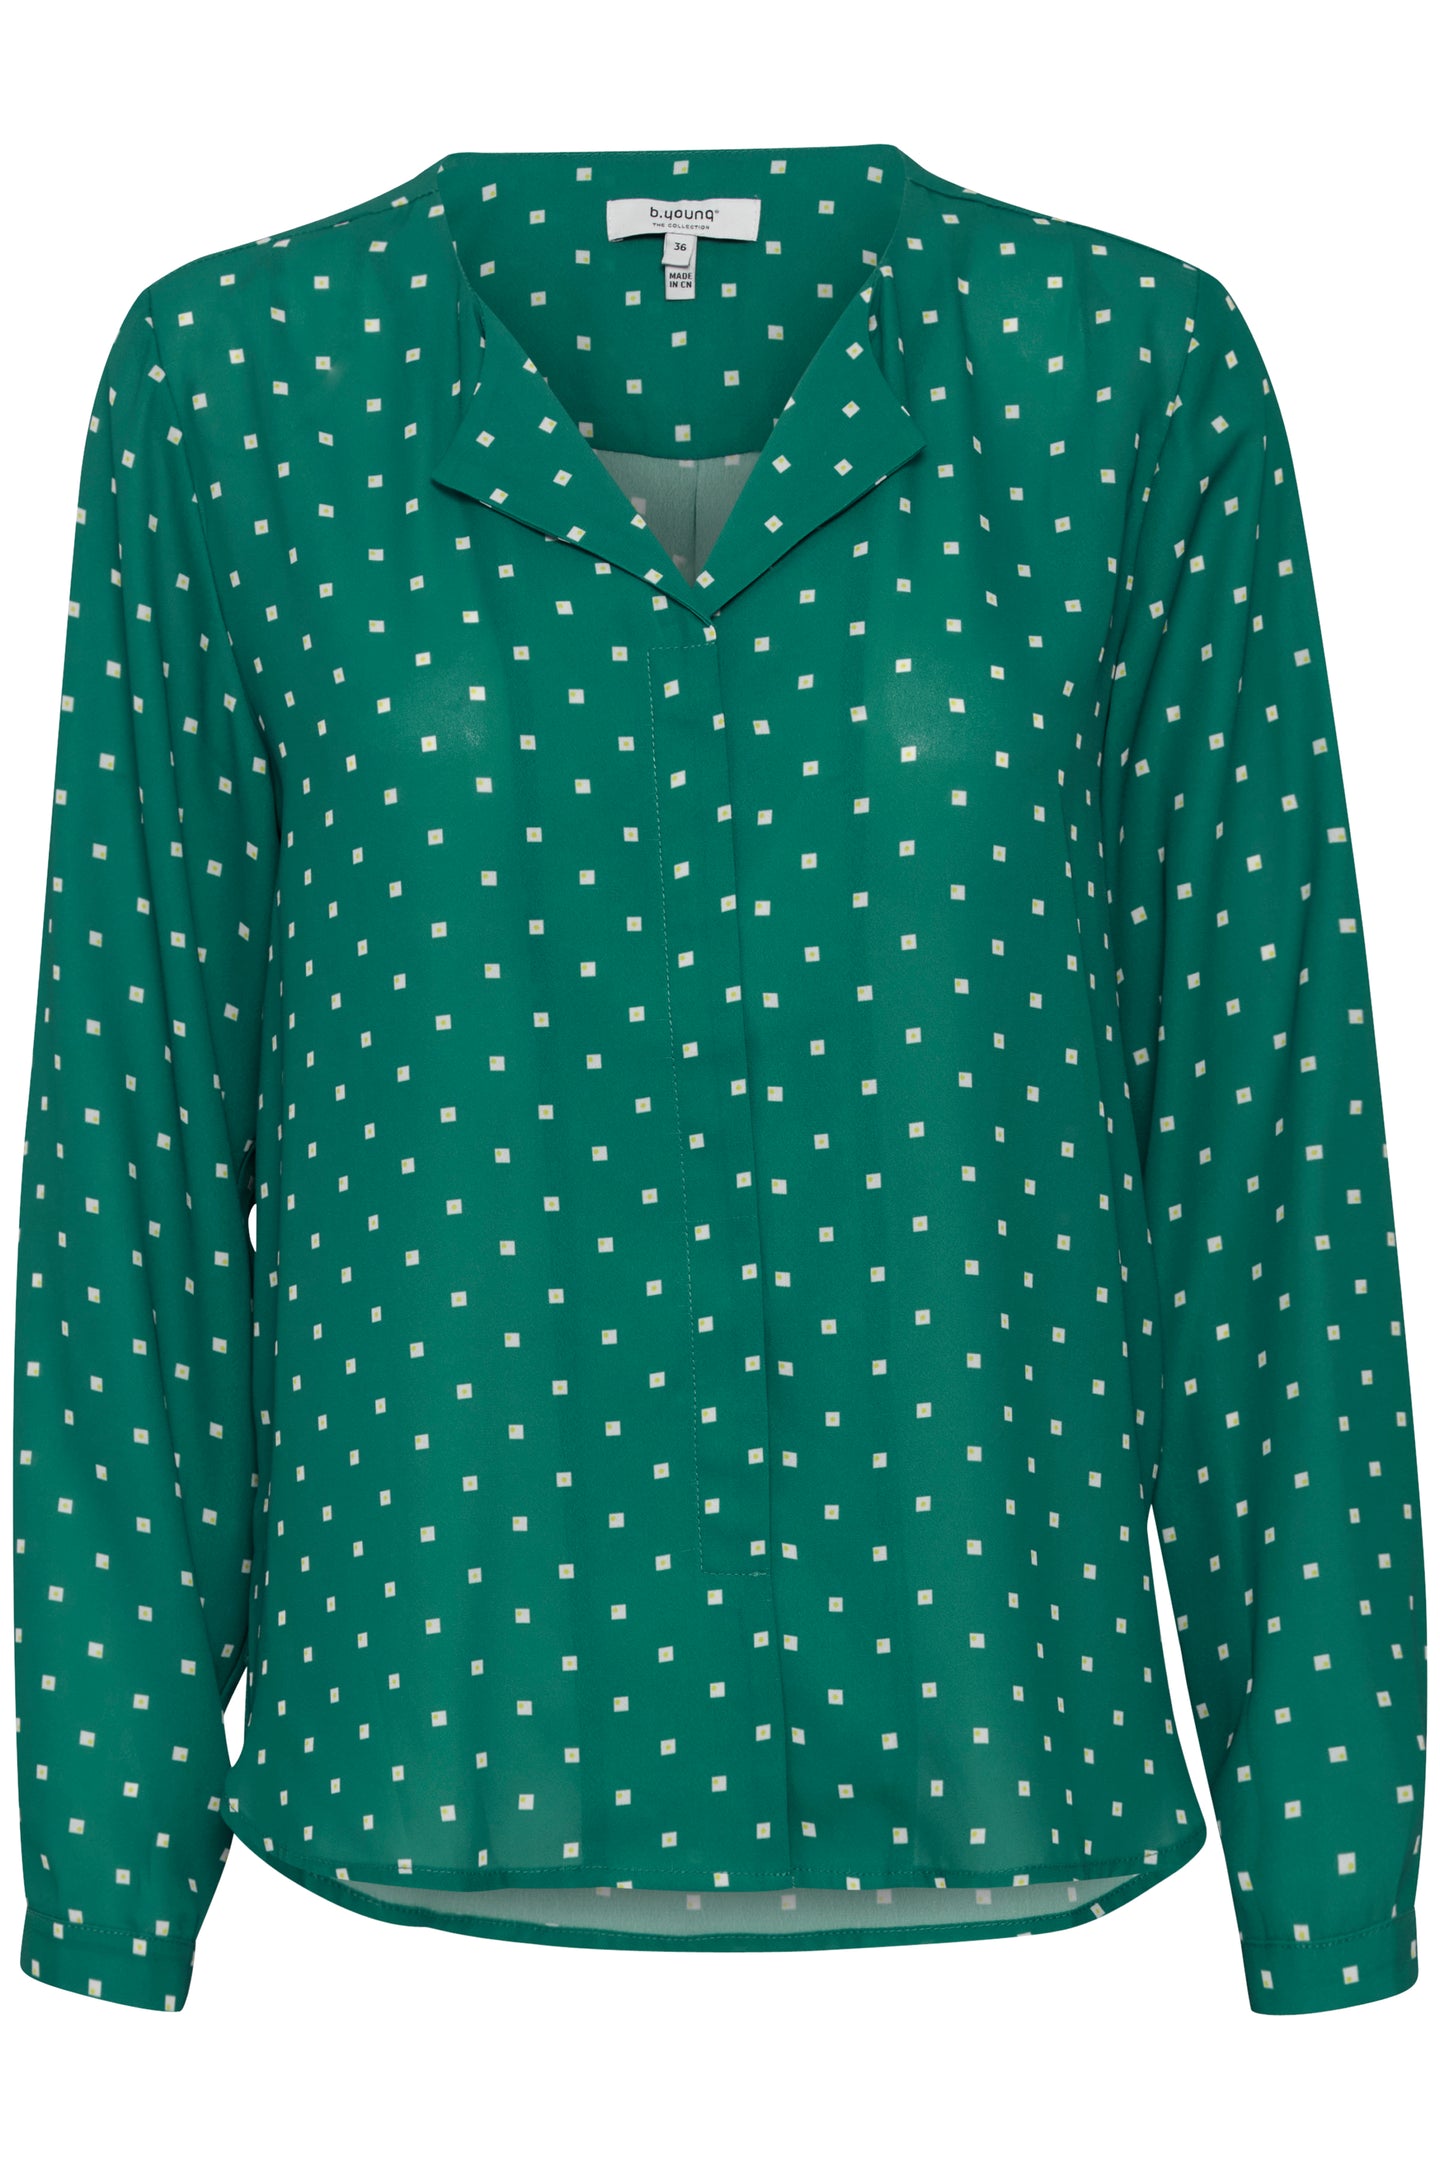 B. Young Hialice Blouse